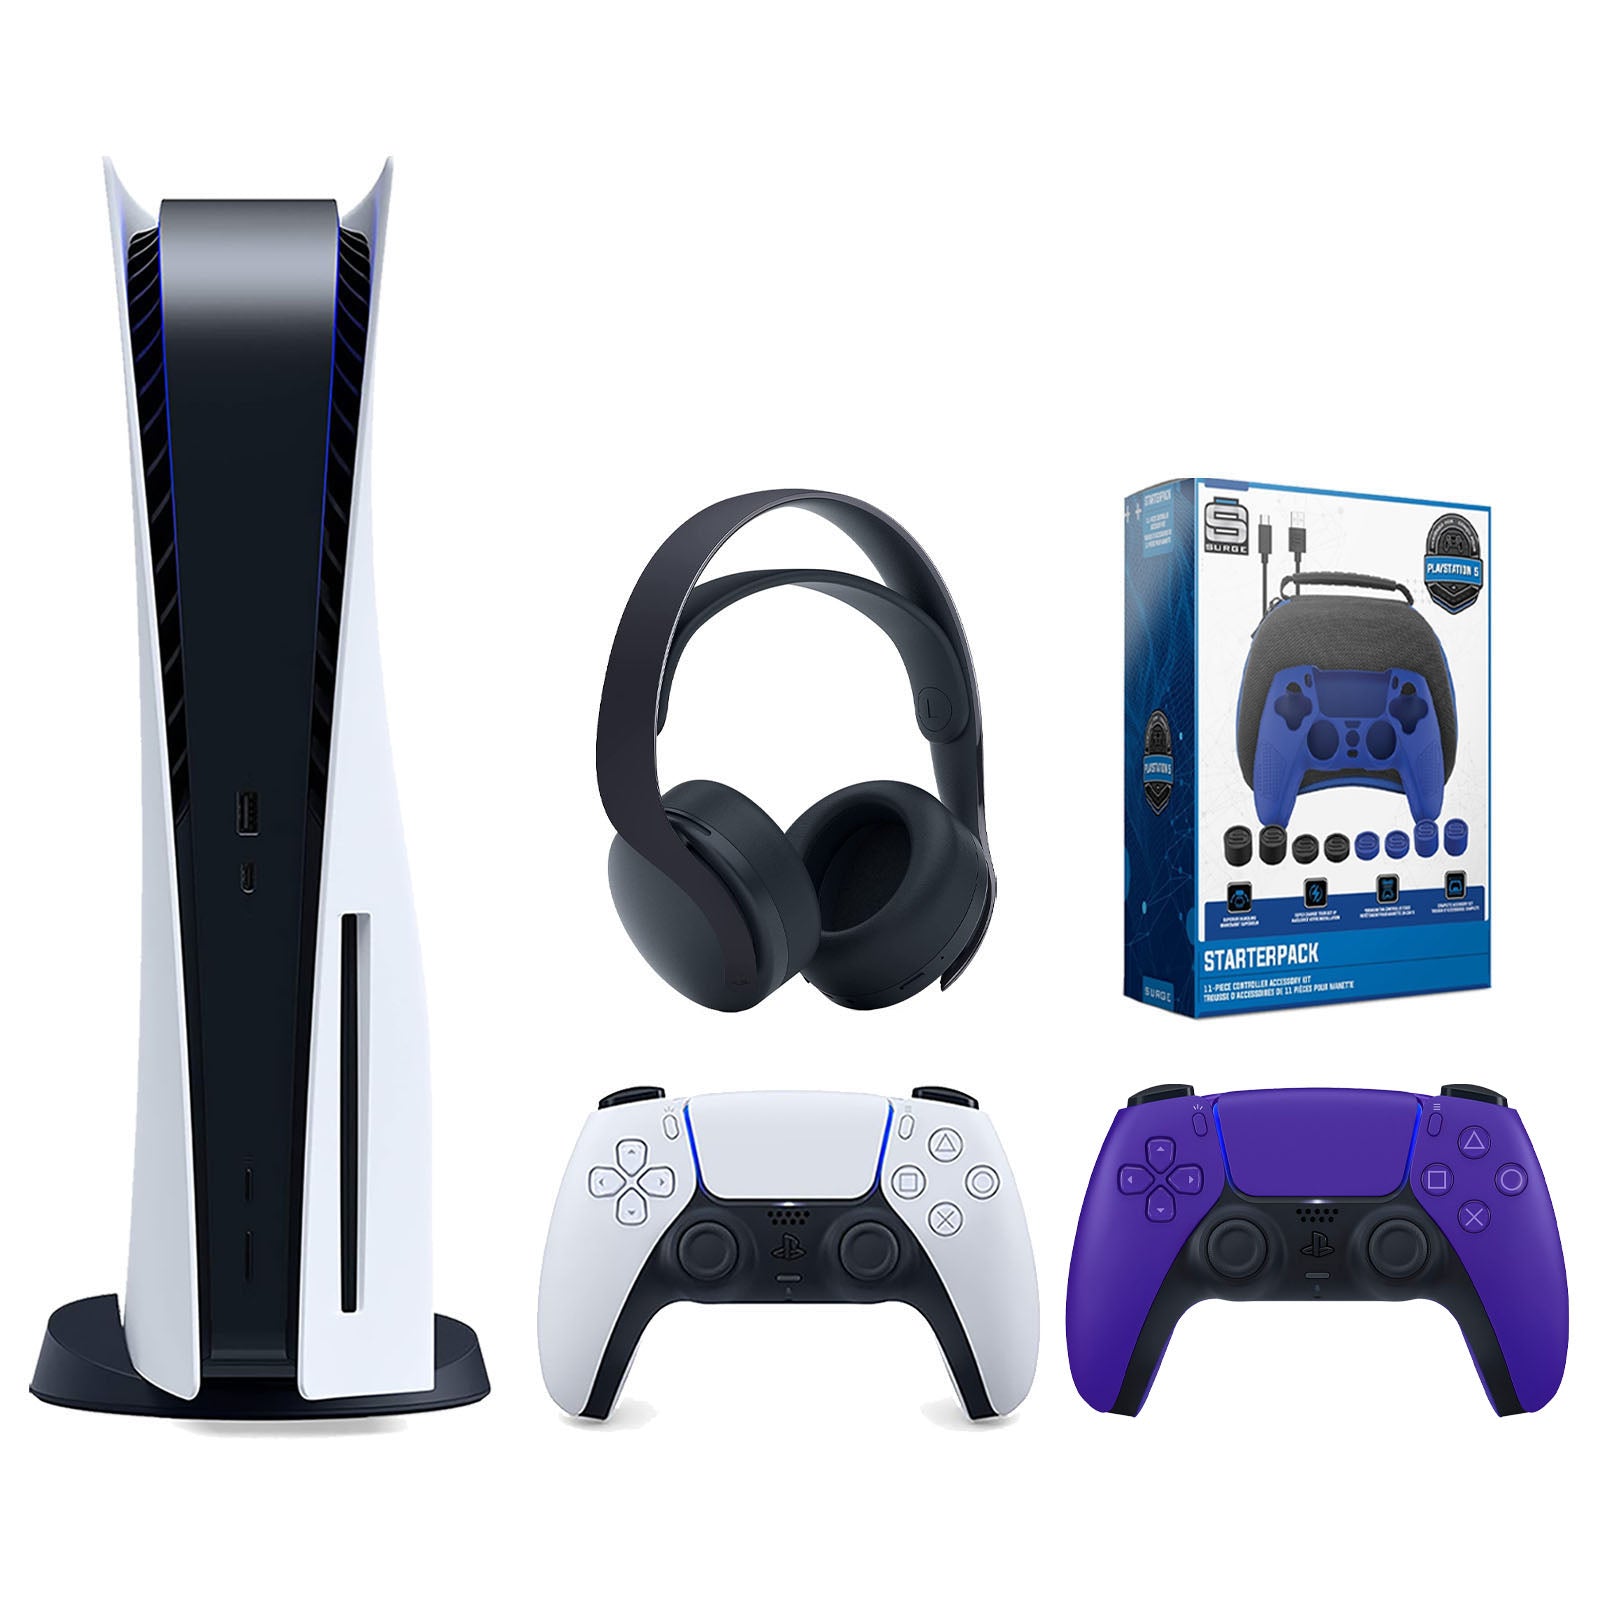 Sony Playstation 5 Disc Version Console with Extra Purple Controller, Black PULSE 3D Headset and Surge Pro Gamer Starter Pack 11-Piece Accessory Bundle - Pro-Distributing